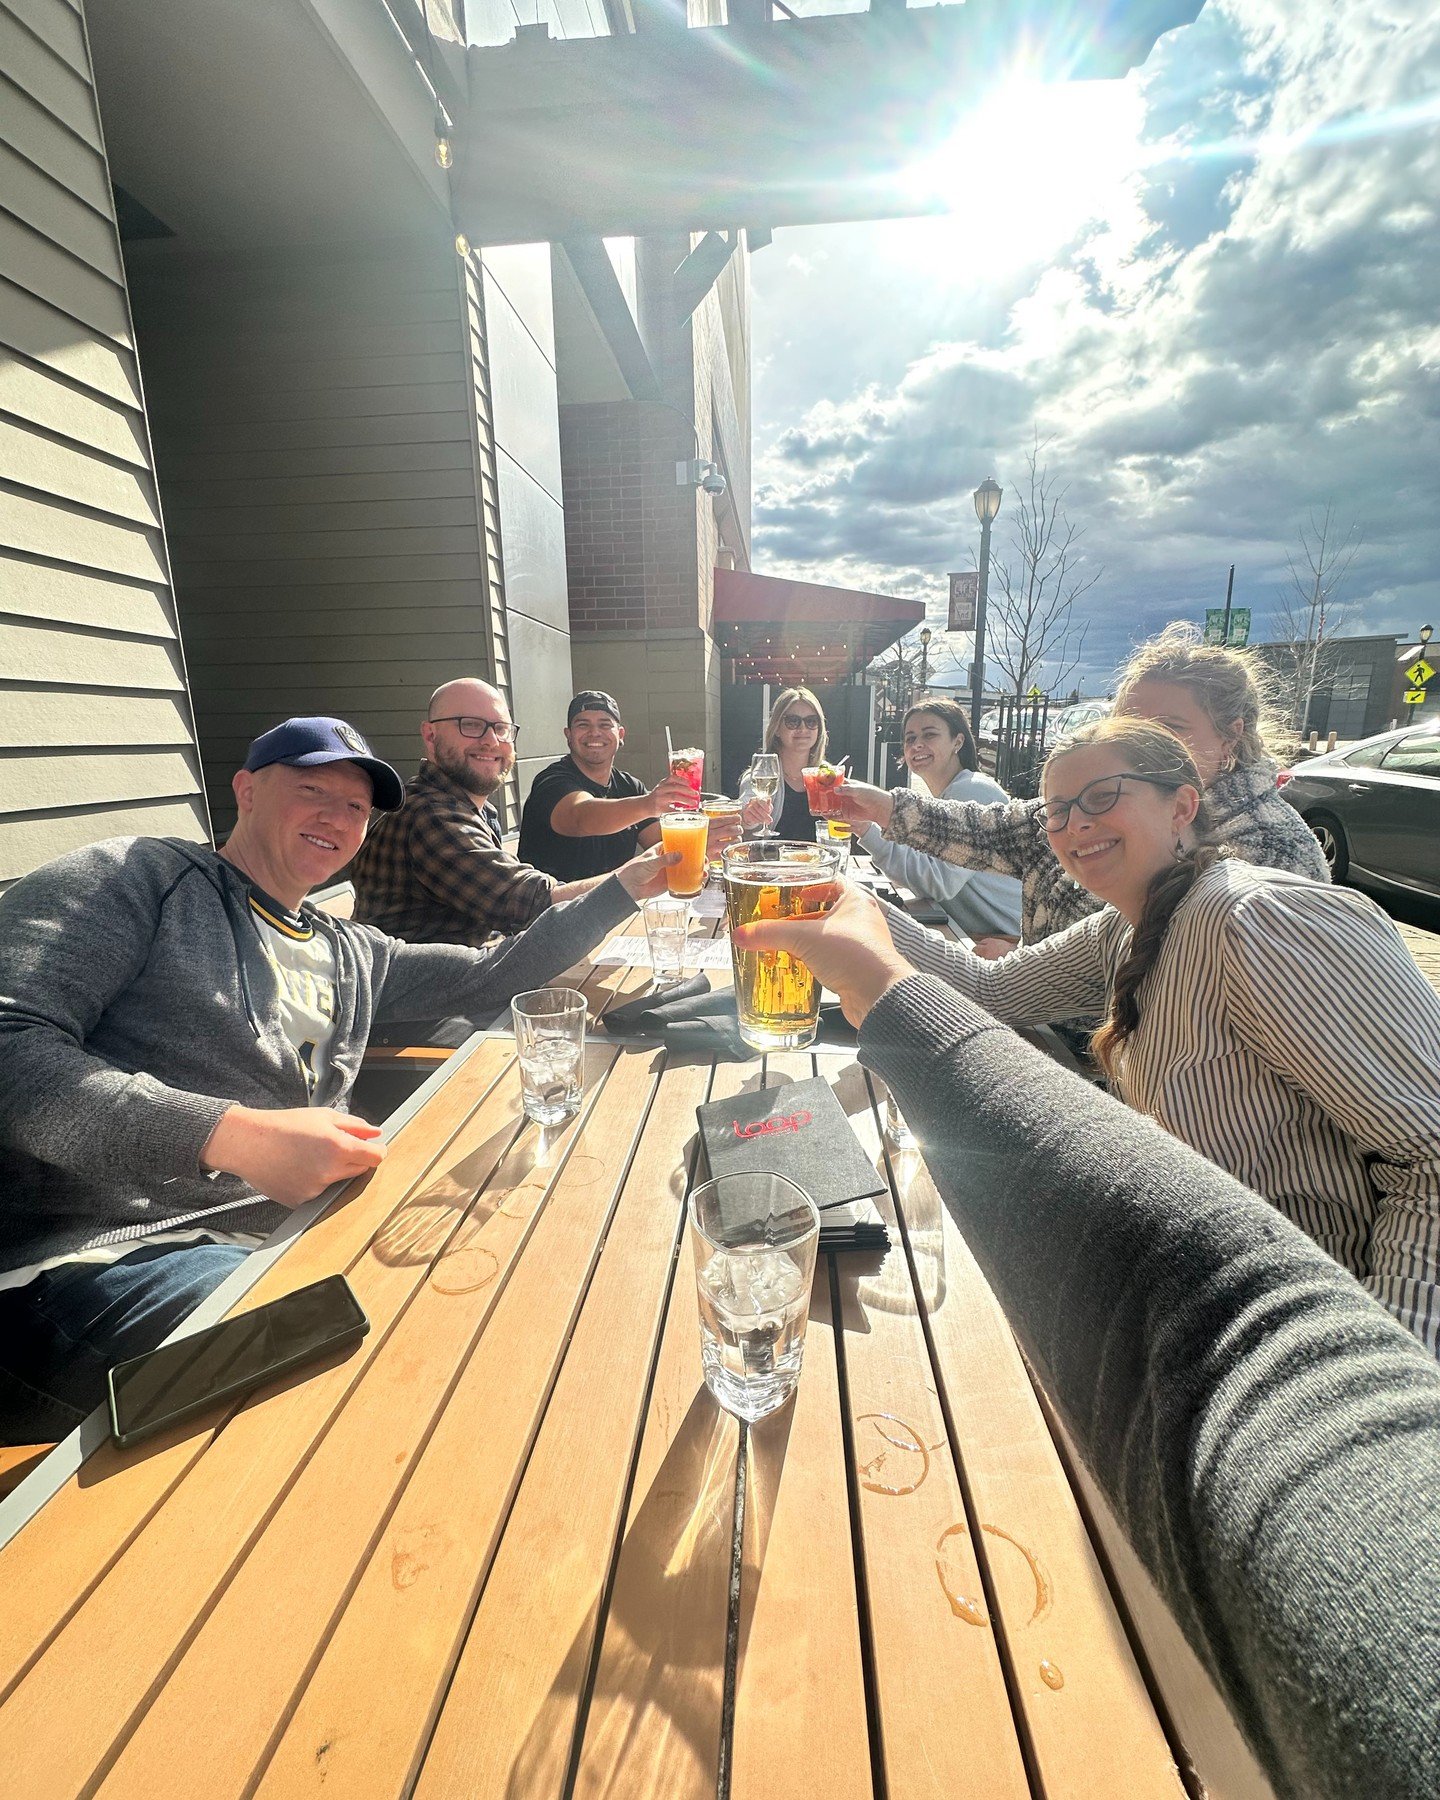 The Touchpoint team had a great time enjoying the spring weather at our impromptu happy hour this week. Cheers to the weekend. 🍻